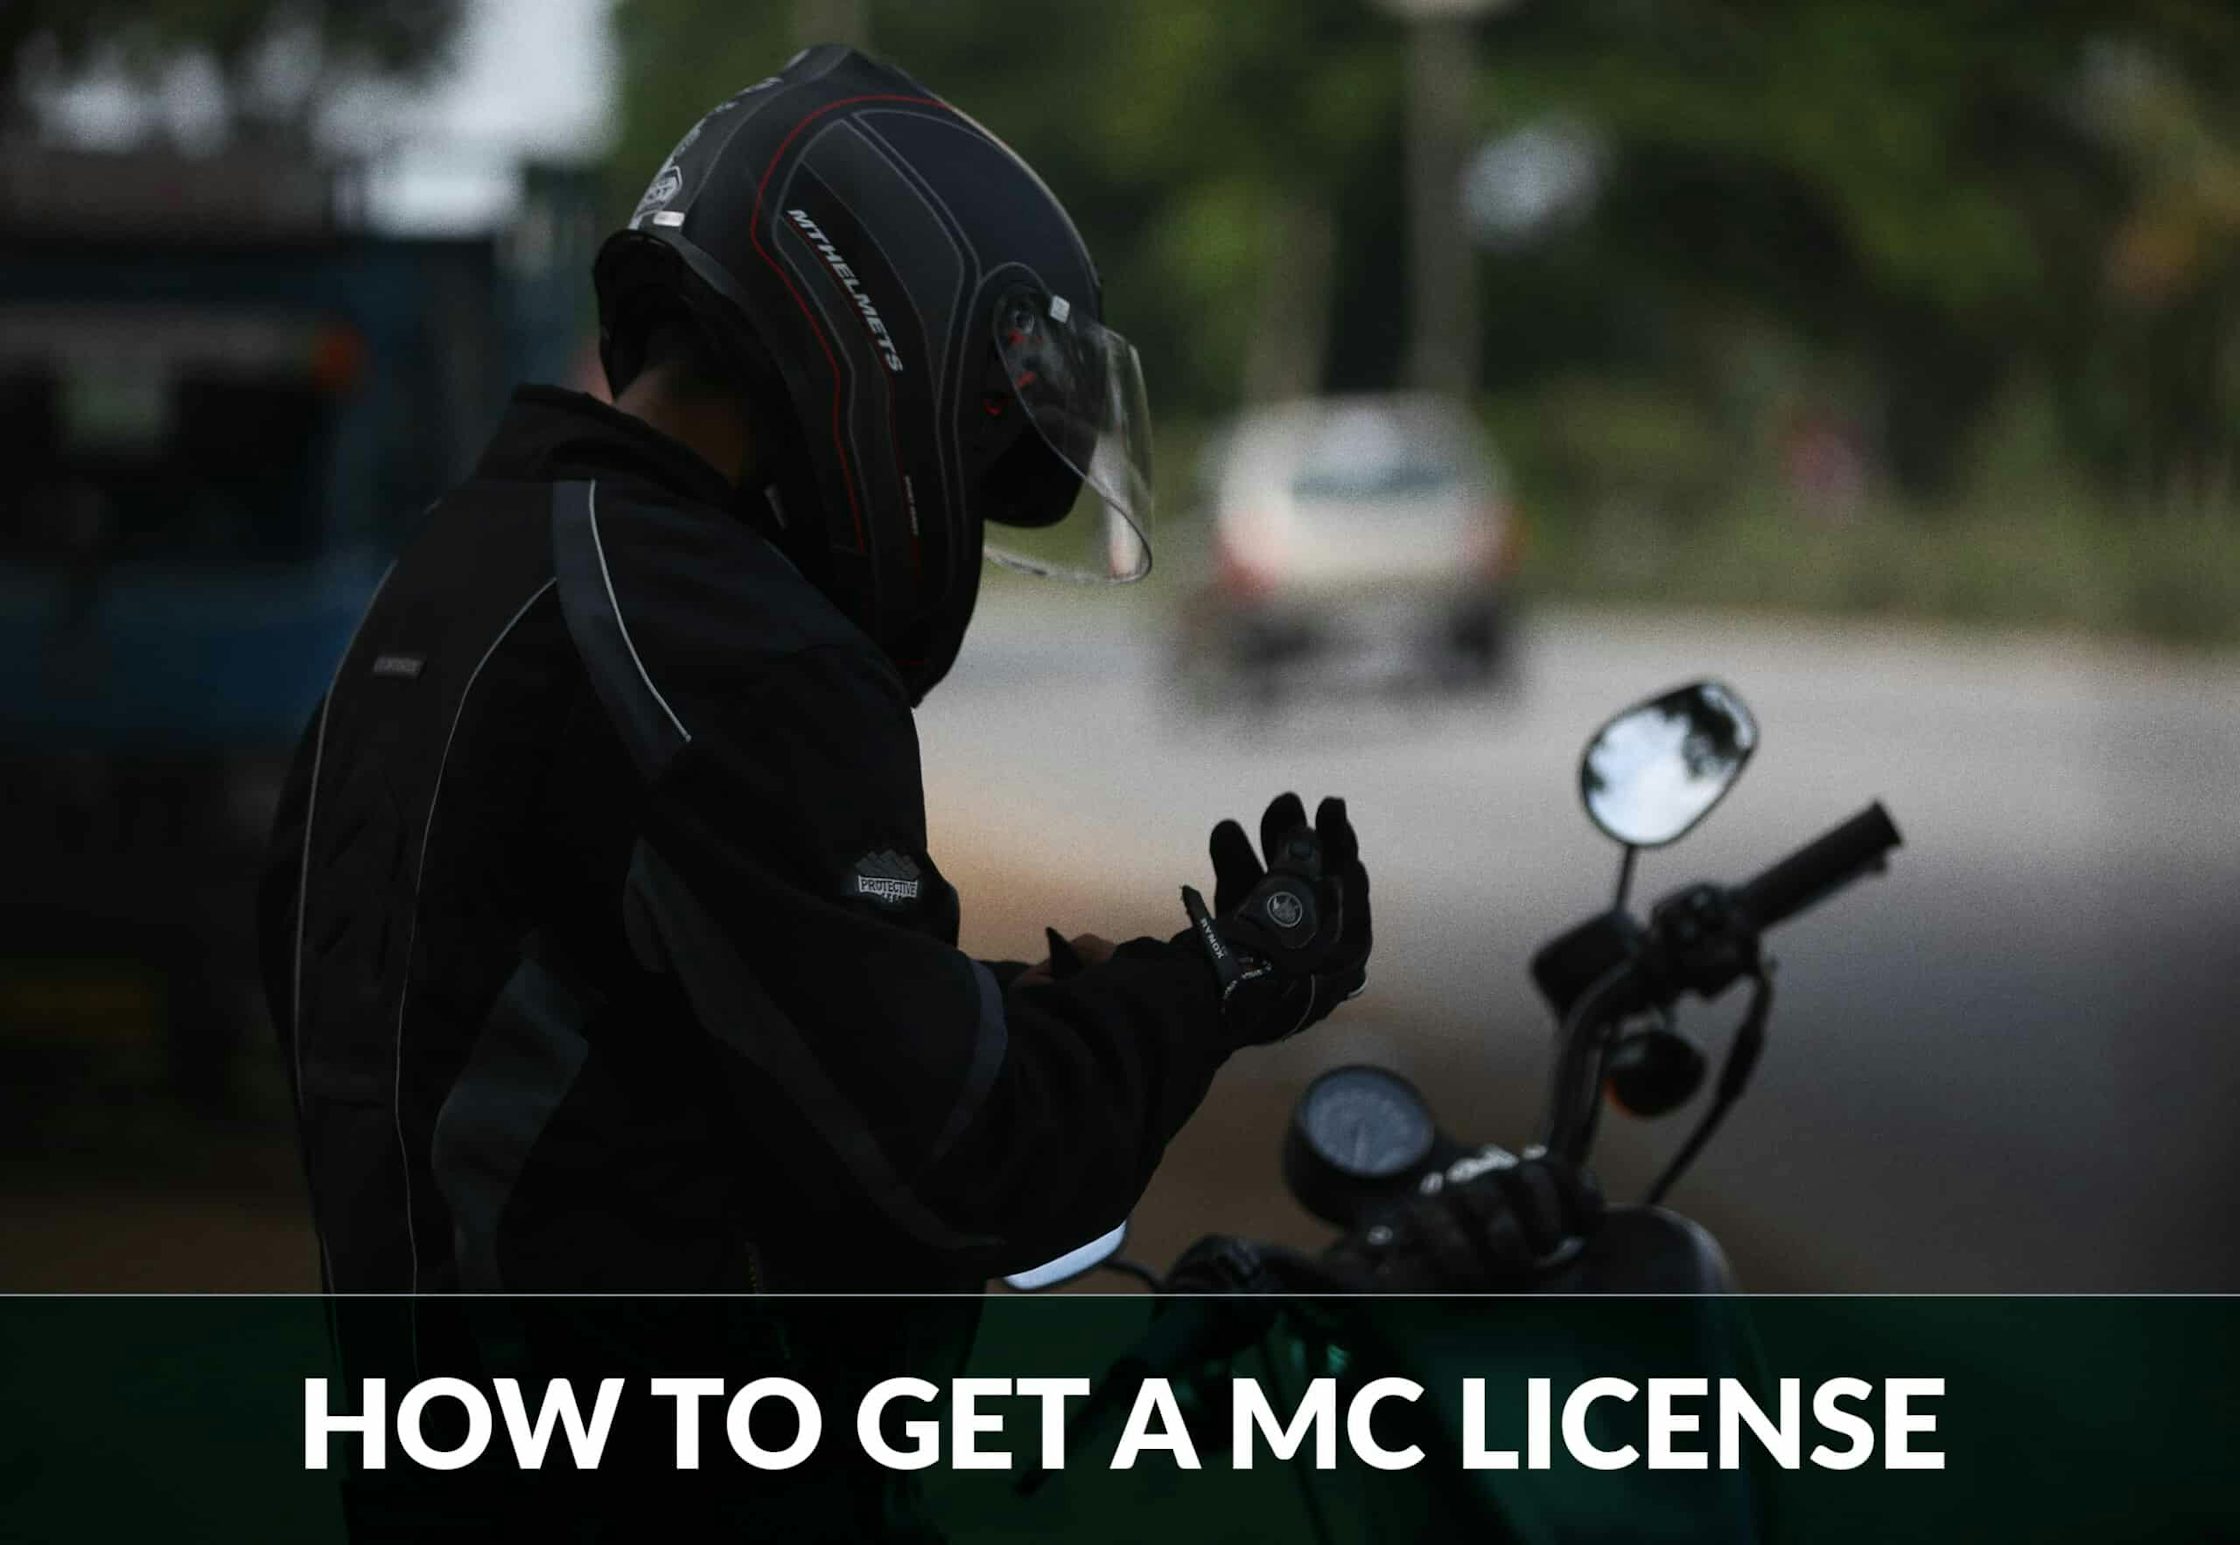 How to Get Your Motorcycle License (Step-by-Step Guide)